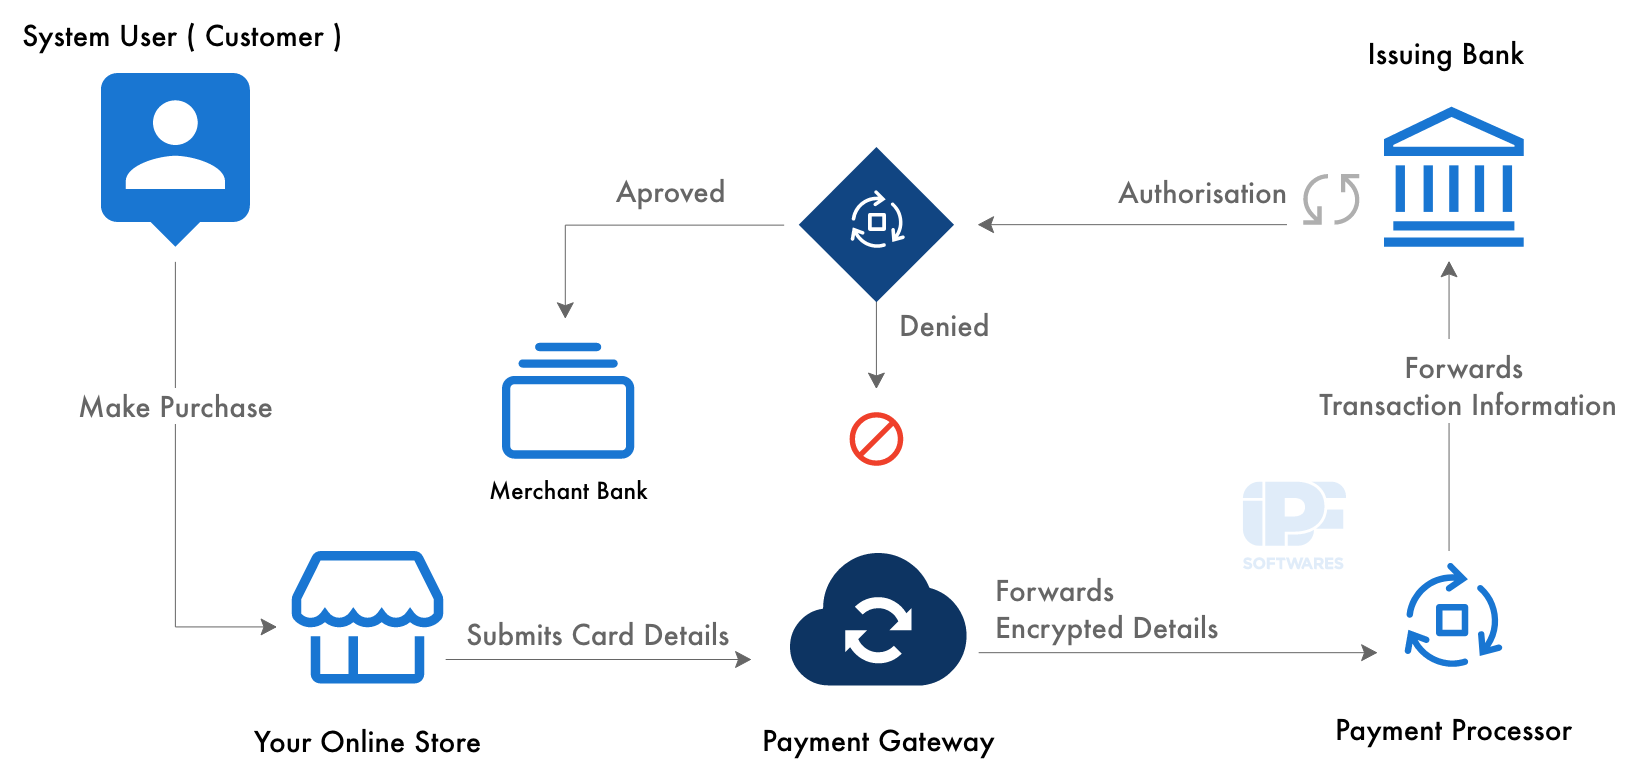 Figure showing payment gateway process for card transactions